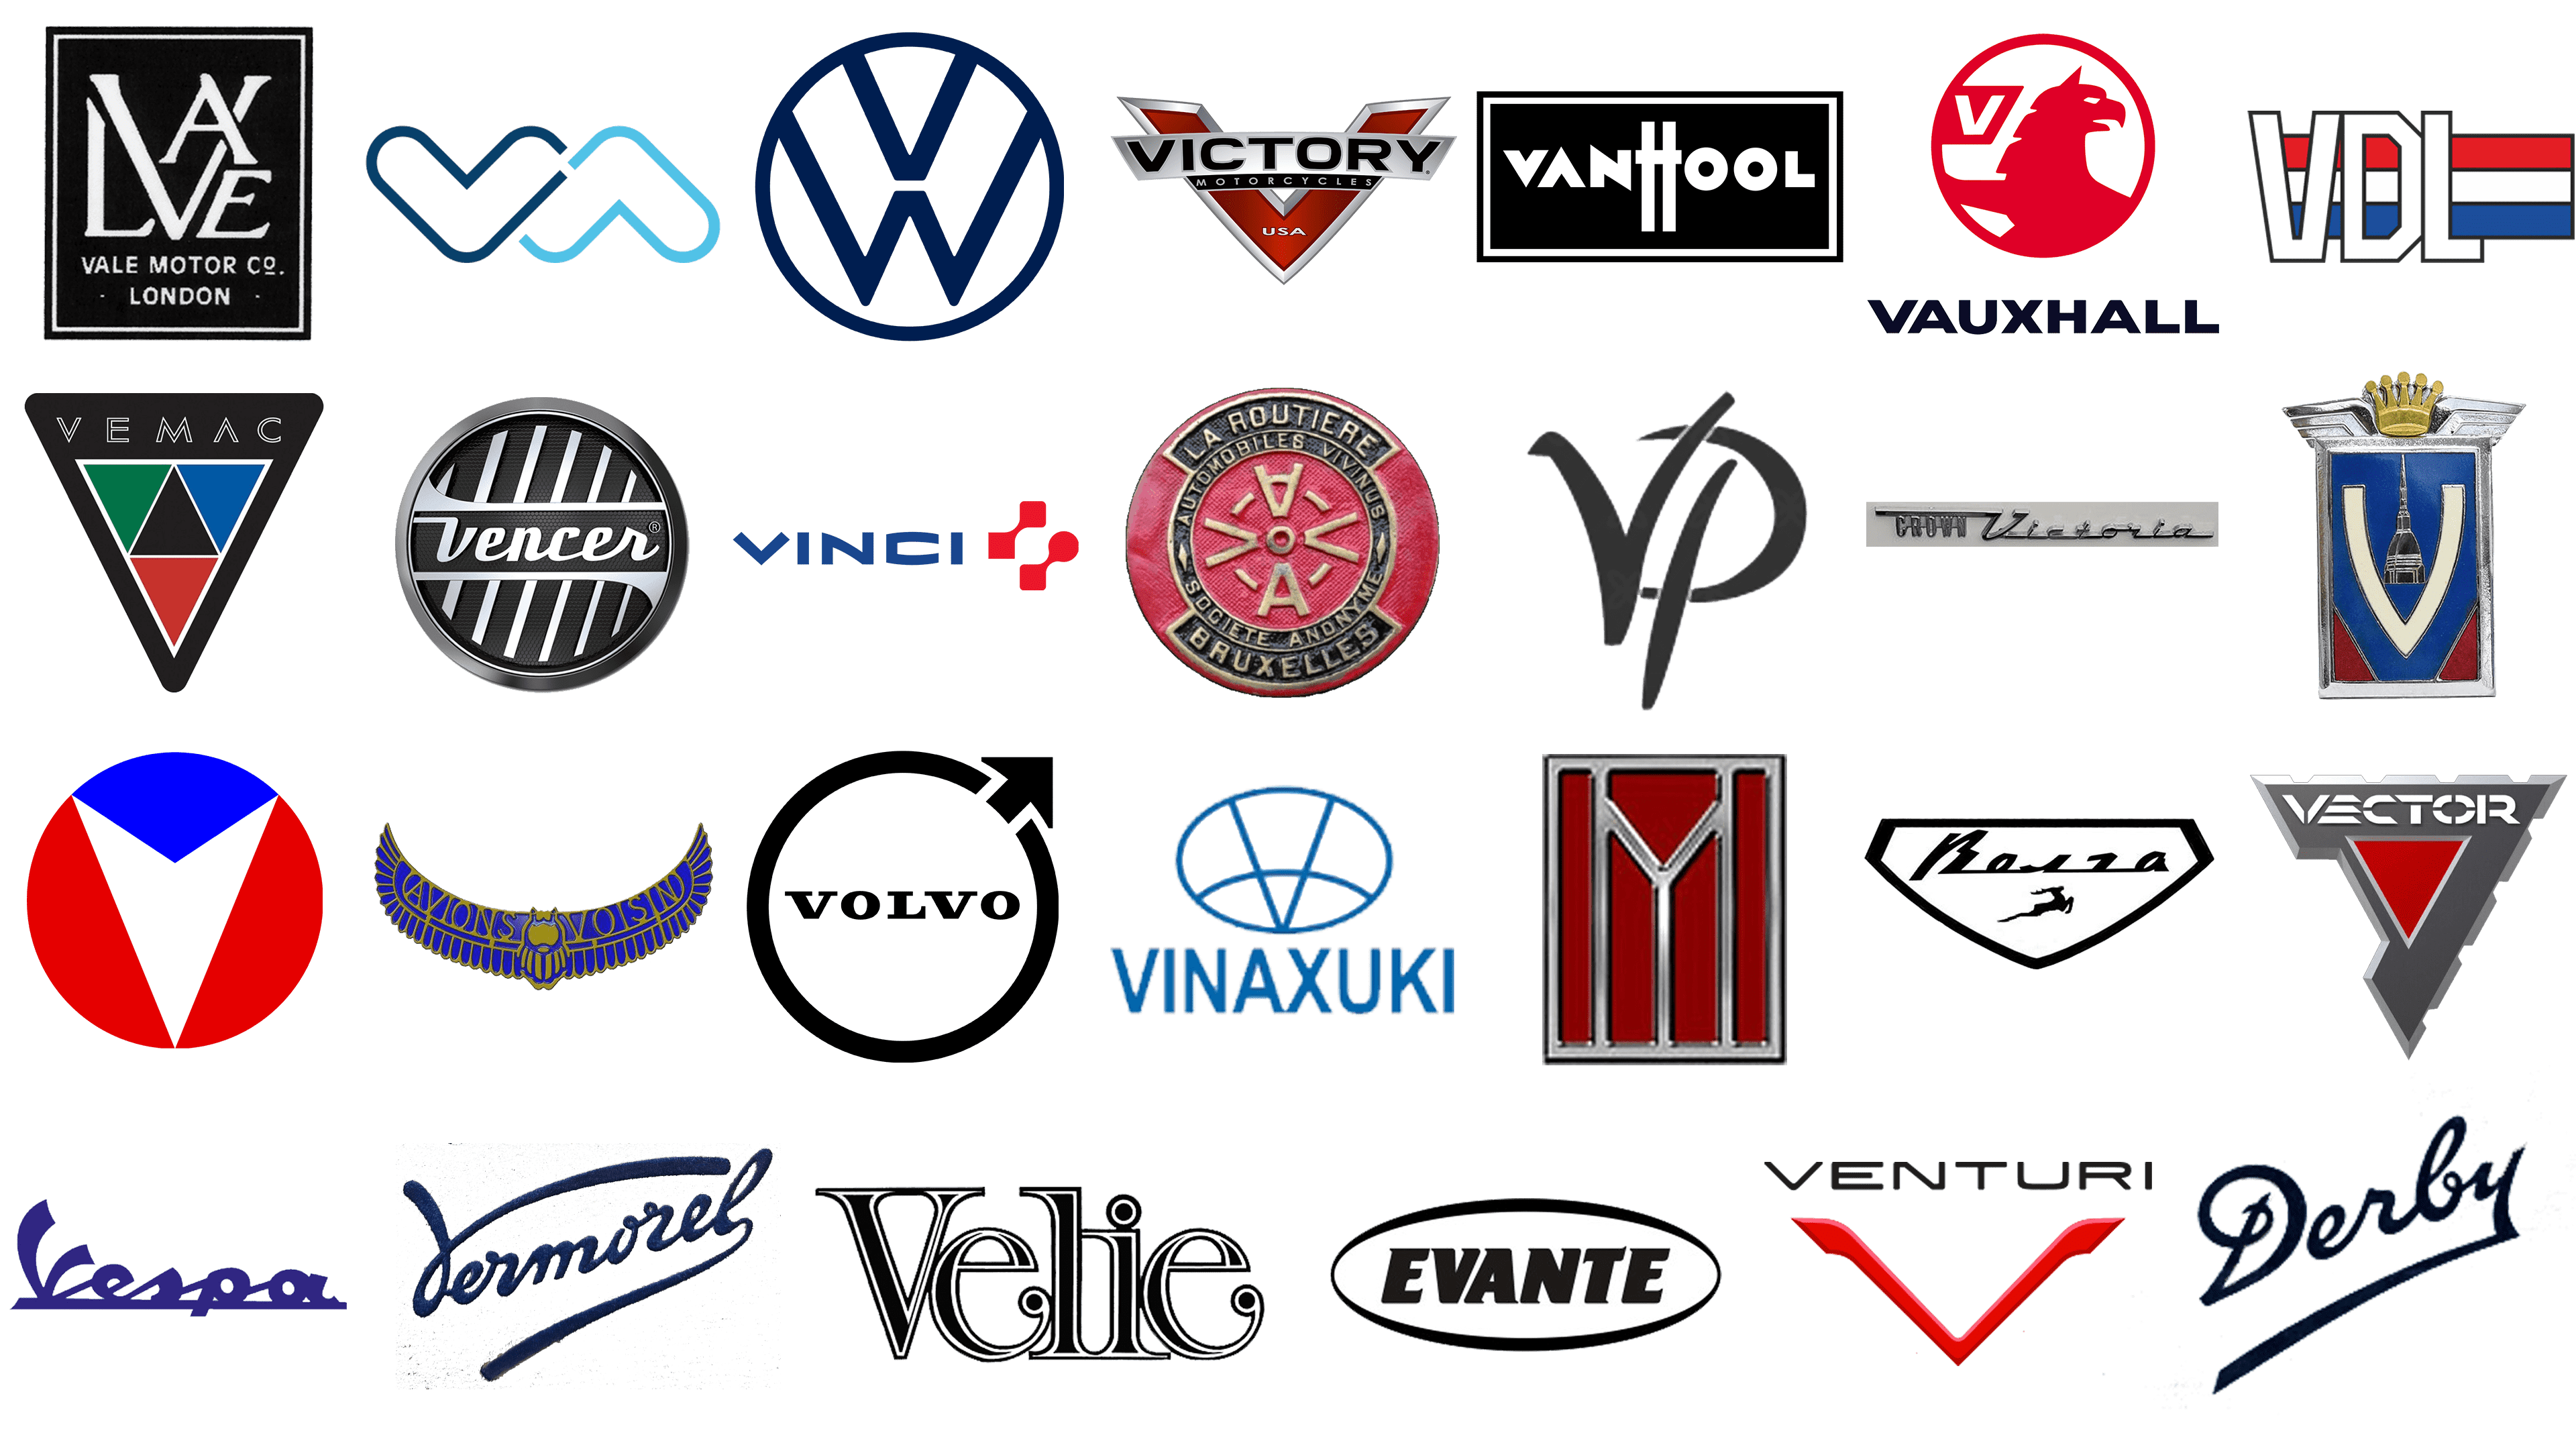 Car Brands That Start With 'V' (10)